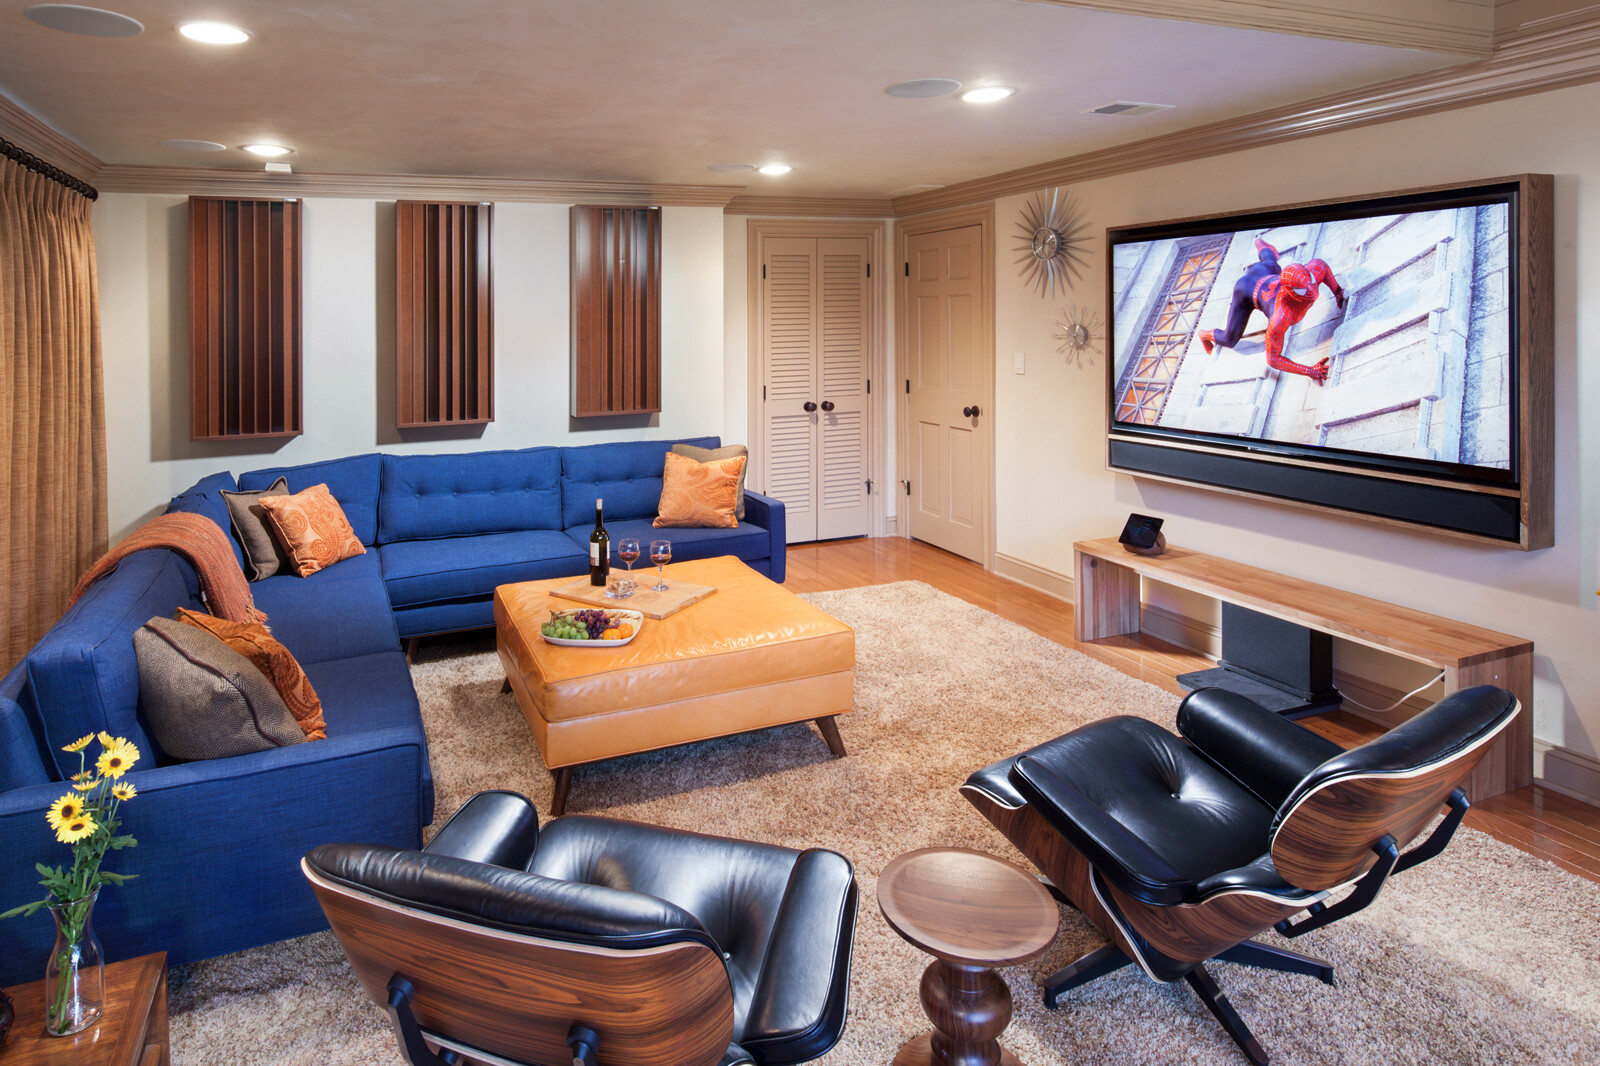 Home Theatre Room With Hi-Def Flat Panel TV & Architectural Loudspeakers